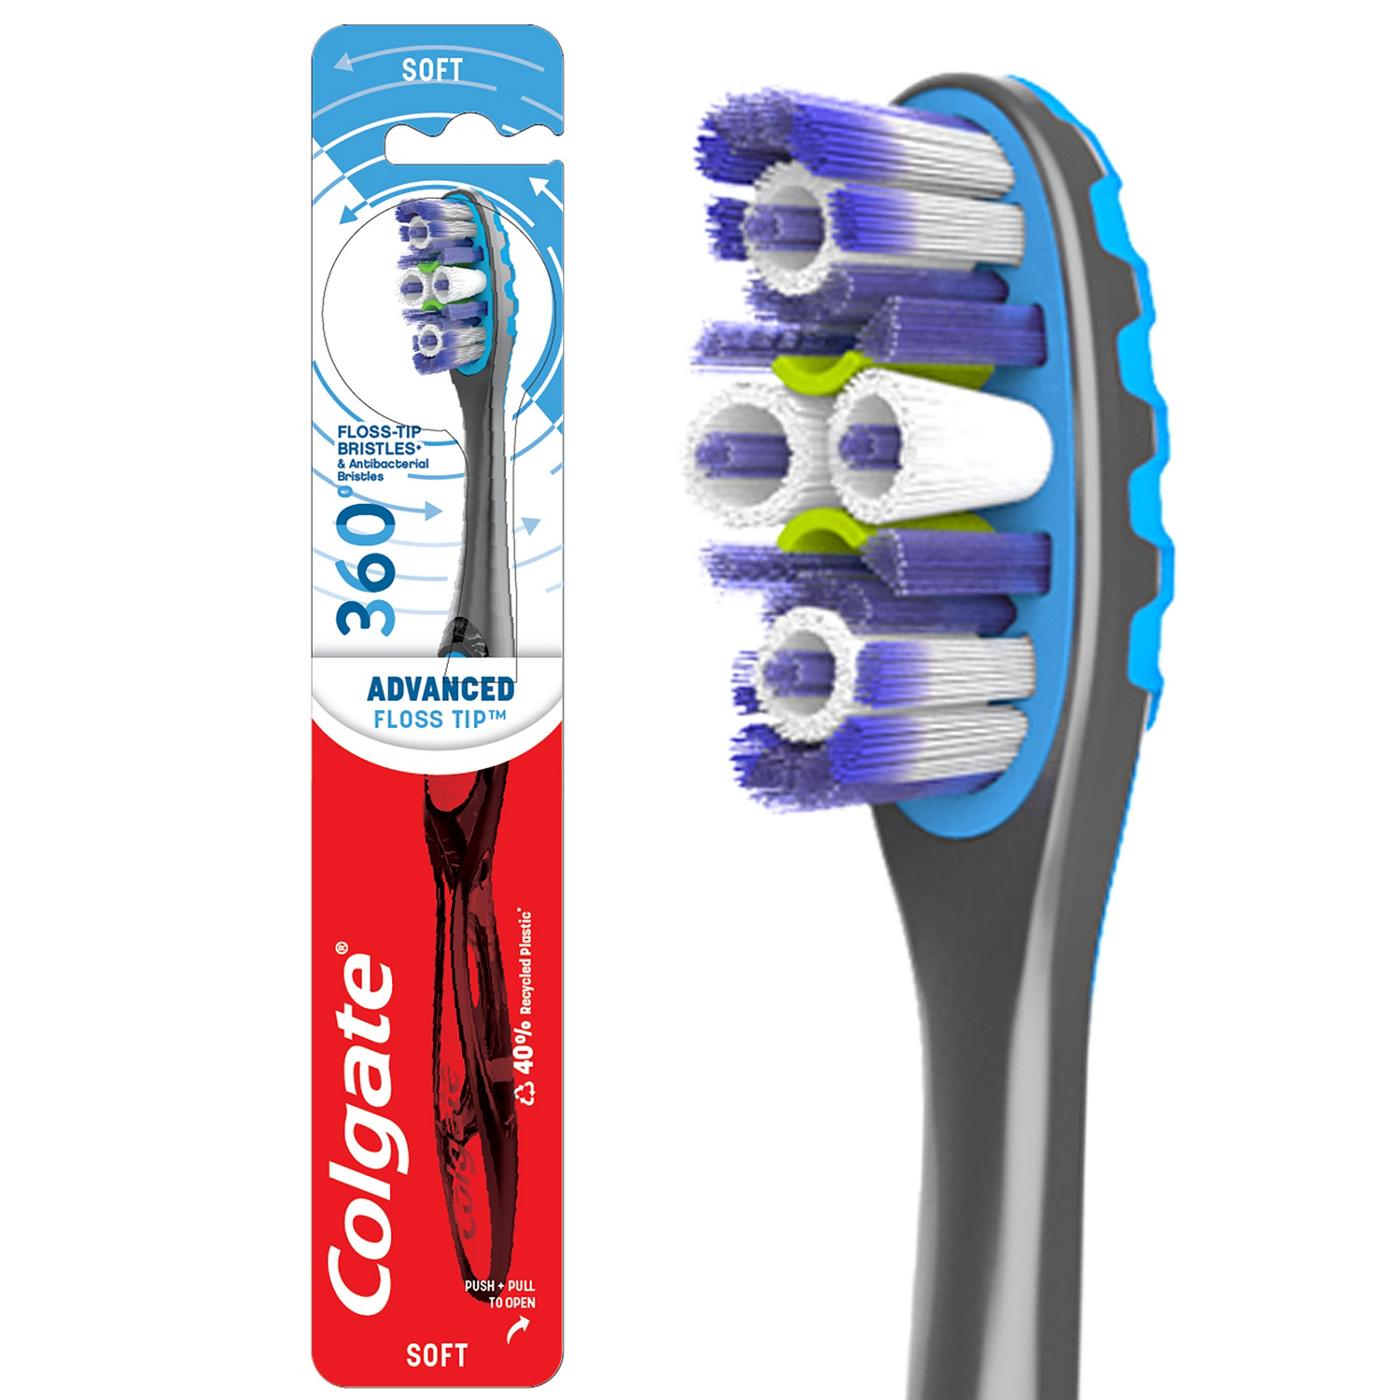 Colgate 360 Advanced Floss-Tip Toothbrush - Soft; image 6 of 8